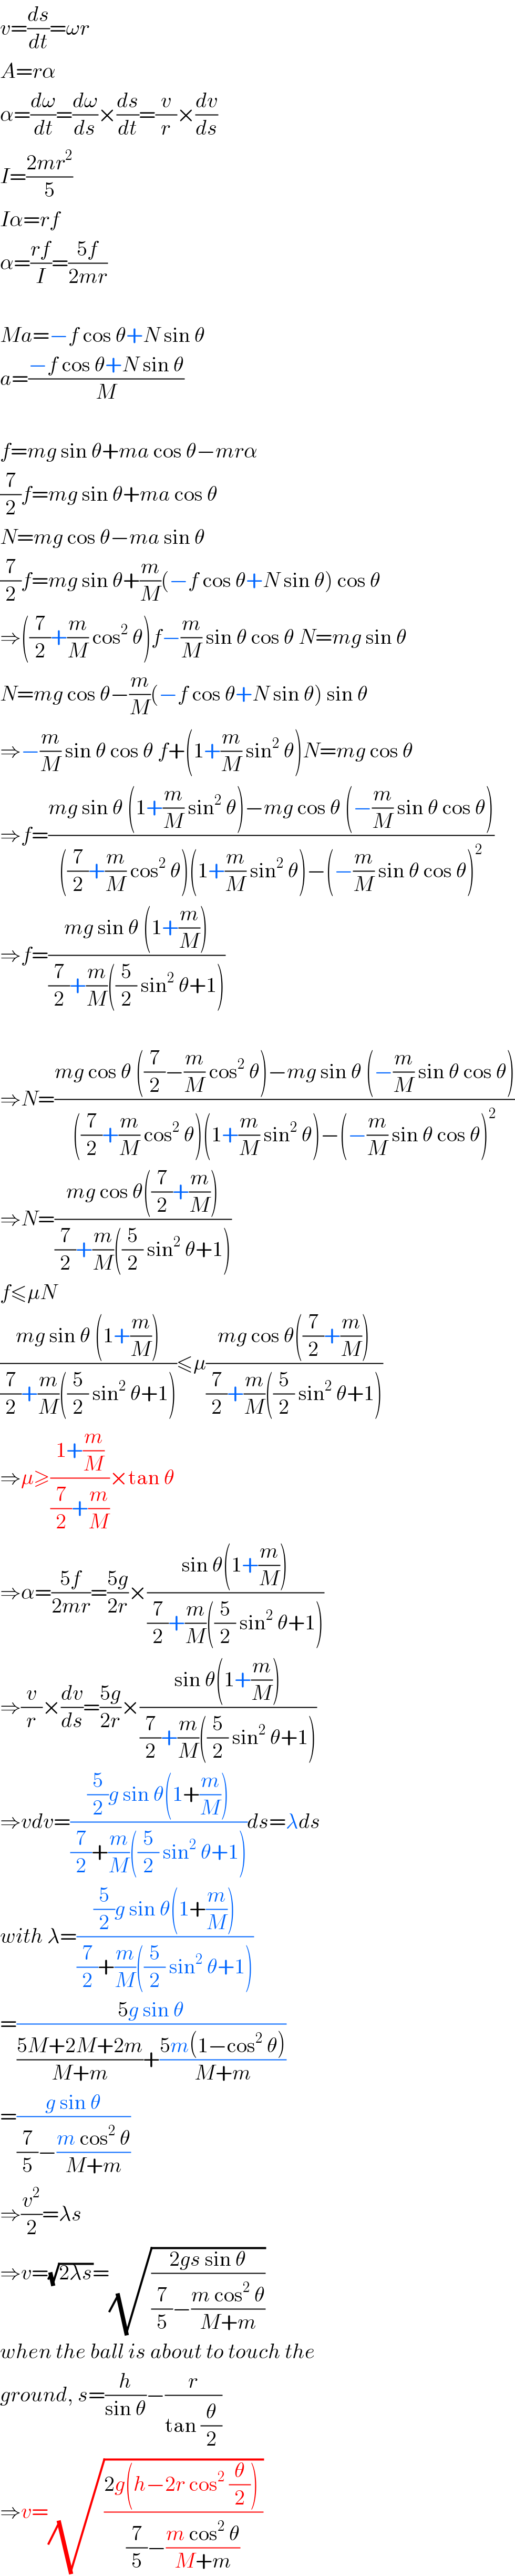 v=(ds/dt)=ωr  A=rα  α=(dω/dt)=(dω/ds)×(ds/dt)=(v/r)×(dv/ds)  I=((2mr^2 )/5)  Iα=rf  α=((rf)/I)=((5f)/(2mr))    Ma=−f cos θ+N sin θ  a=((−f cos θ+N sin θ)/M)    f=mg sin θ+ma cos θ−mrα  (7/2)f=mg sin θ+ma cos θ  N=mg cos θ−ma sin θ  (7/2)f=mg sin θ+(m/M)(−f cos θ+N sin θ) cos θ  ⇒((7/2)+(m/M) cos^2  θ)f−(m/M) sin θ cos θ N=mg sin θ  N=mg cos θ−(m/M)(−f cos θ+N sin θ) sin θ  ⇒−(m/M) sin θ cos θ f+(1+(m/M) sin^2  θ)N=mg cos θ  ⇒f=((mg sin θ (1+(m/M) sin^2  θ)−mg cos θ (−(m/M) sin θ cos θ))/(((7/2)+(m/M) cos^2  θ)(1+(m/M) sin^2  θ)−(−(m/M) sin θ cos θ)^2 ))  ⇒f=((mg sin θ (1+(m/M)))/((7/2)+(m/M)((5/2) sin^2  θ+1)))    ⇒N=((mg cos θ ((7/2)−(m/M) cos^2  θ)−mg sin θ (−(m/M) sin θ cos θ))/(((7/2)+(m/M) cos^2  θ)(1+(m/M) sin^2  θ)−(−(m/M) sin θ cos θ)^2 ))  ⇒N=((mg cos θ((7/2)+(m/M)))/((7/2)+(m/M)((5/2) sin^2  θ+1)))  f≤μN  ((mg sin θ (1+(m/M)))/((7/2)+(m/M)((5/2) sin^2  θ+1)))≤μ((mg cos θ((7/2)+(m/M)))/((7/2)+(m/M)((5/2) sin^2  θ+1)))  ⇒μ≥((1+(m/M))/((7/2)+(m/M)))×tan θ  ⇒α=((5f)/(2mr))=((5g)/(2r))×((sin θ(1+(m/M)))/((7/2)+(m/M)((5/2) sin^2  θ+1)))  ⇒(v/r)×(dv/ds)=((5g)/(2r))×((sin θ(1+(m/M)))/((7/2)+(m/M)((5/2) sin^2  θ+1)))  ⇒vdv=(((5/2)g sin θ(1+(m/M)))/((7/2)+(m/M)((5/2) sin^2  θ+1)))ds=λds  with λ=(((5/2)g sin θ(1+(m/M)))/((7/2)+(m/M)((5/2) sin^2  θ+1)))  =((5g sin θ)/(((5M+2M+2m)/(M+m))+((5m(1−cos^2  θ))/(M+m))))  =((g sin θ)/((7/5)−((m cos^2  θ)/(M+m))))  ⇒(v^2 /2)=λs  ⇒v=(√(2λs))=(√((2gs sin θ)/((7/5)−((m cos^2  θ)/(M+m)))))  when the ball is about to touch the  ground, s=(h/(sin θ))−(r/(tan (θ/2)))  ⇒v=(√((2g(h−2r cos^2  (θ/2)) )/((7/5)−((m cos^2  θ)/(M+m)))))  